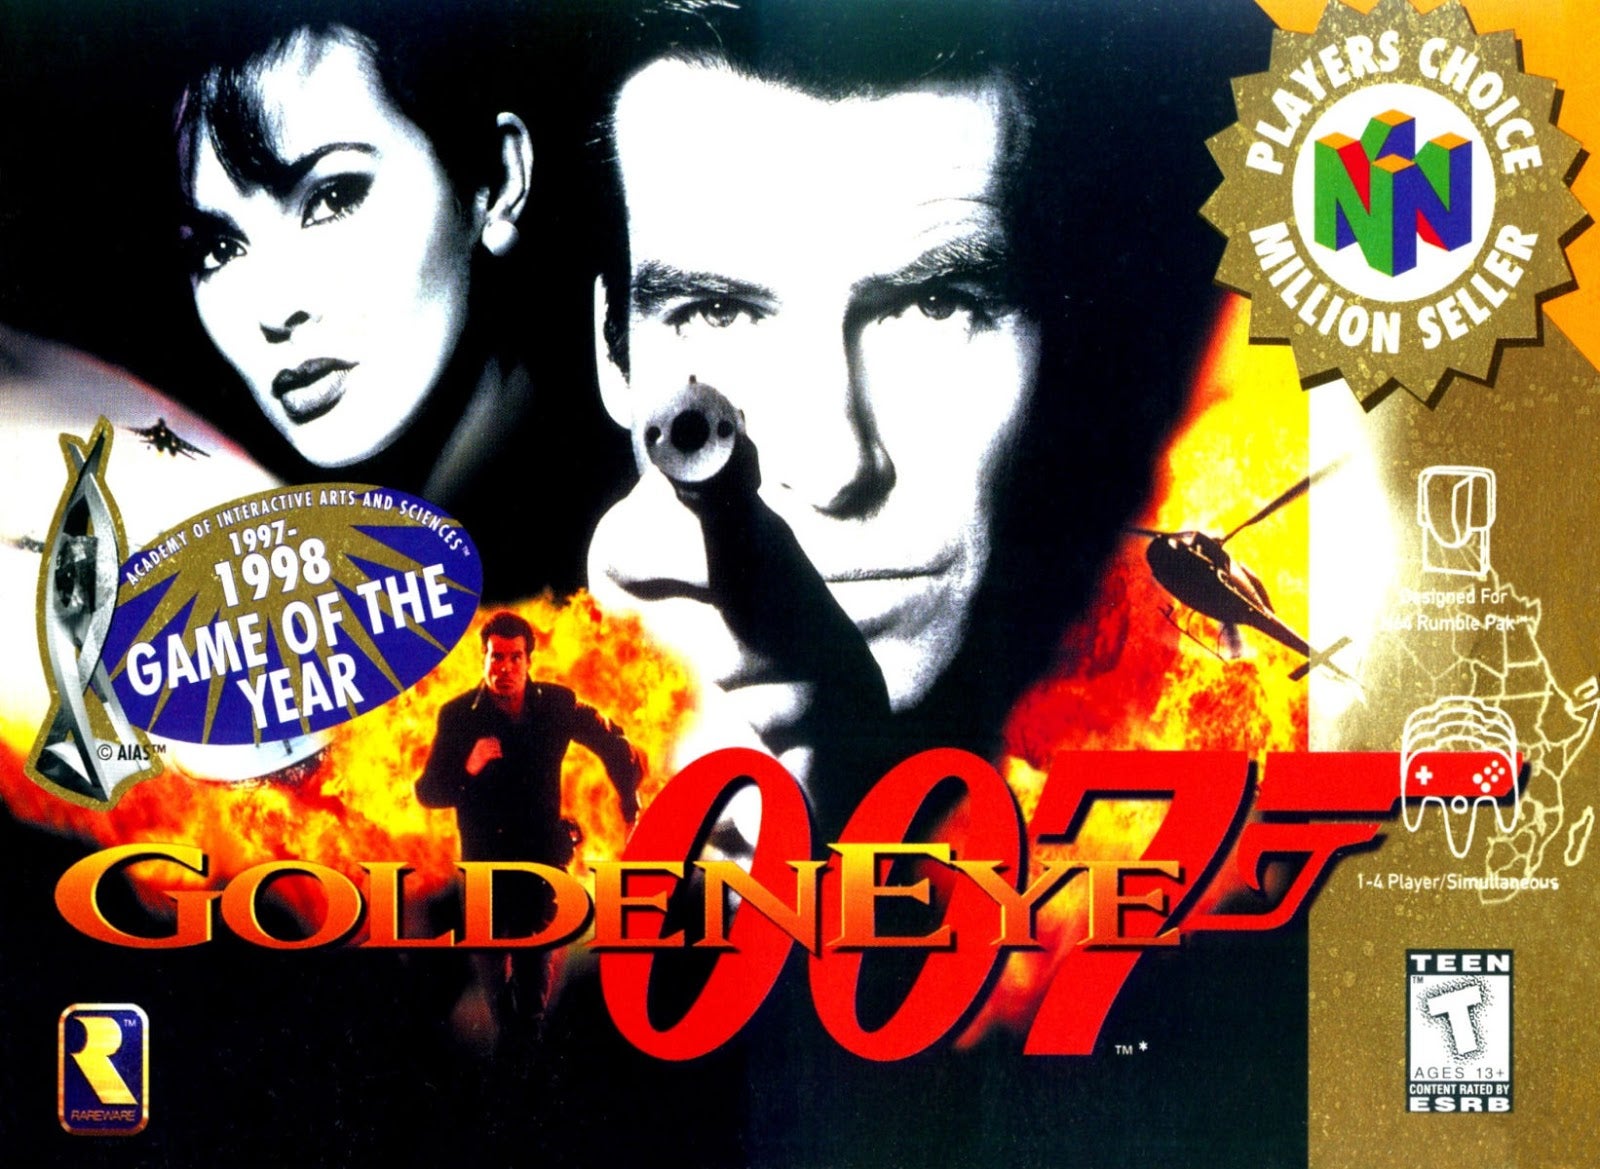 Image for Pierce Brosnan is pretty rubbish at GoldenEye 007 in this video